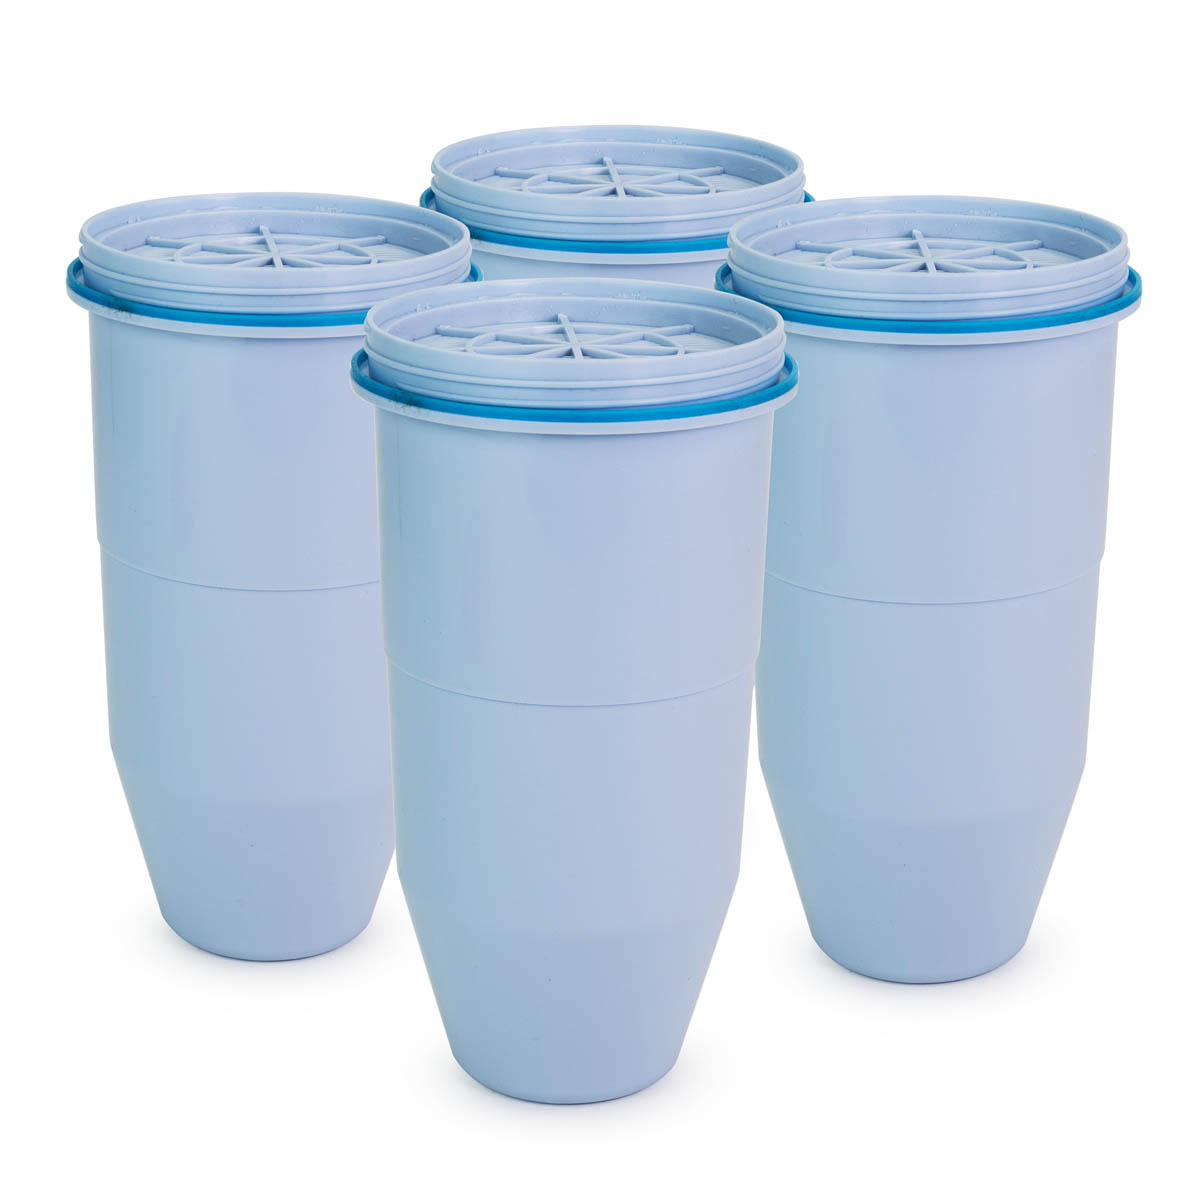 ZR-006 ZeroWater Replacement Filter Cartridge (4-Pack)